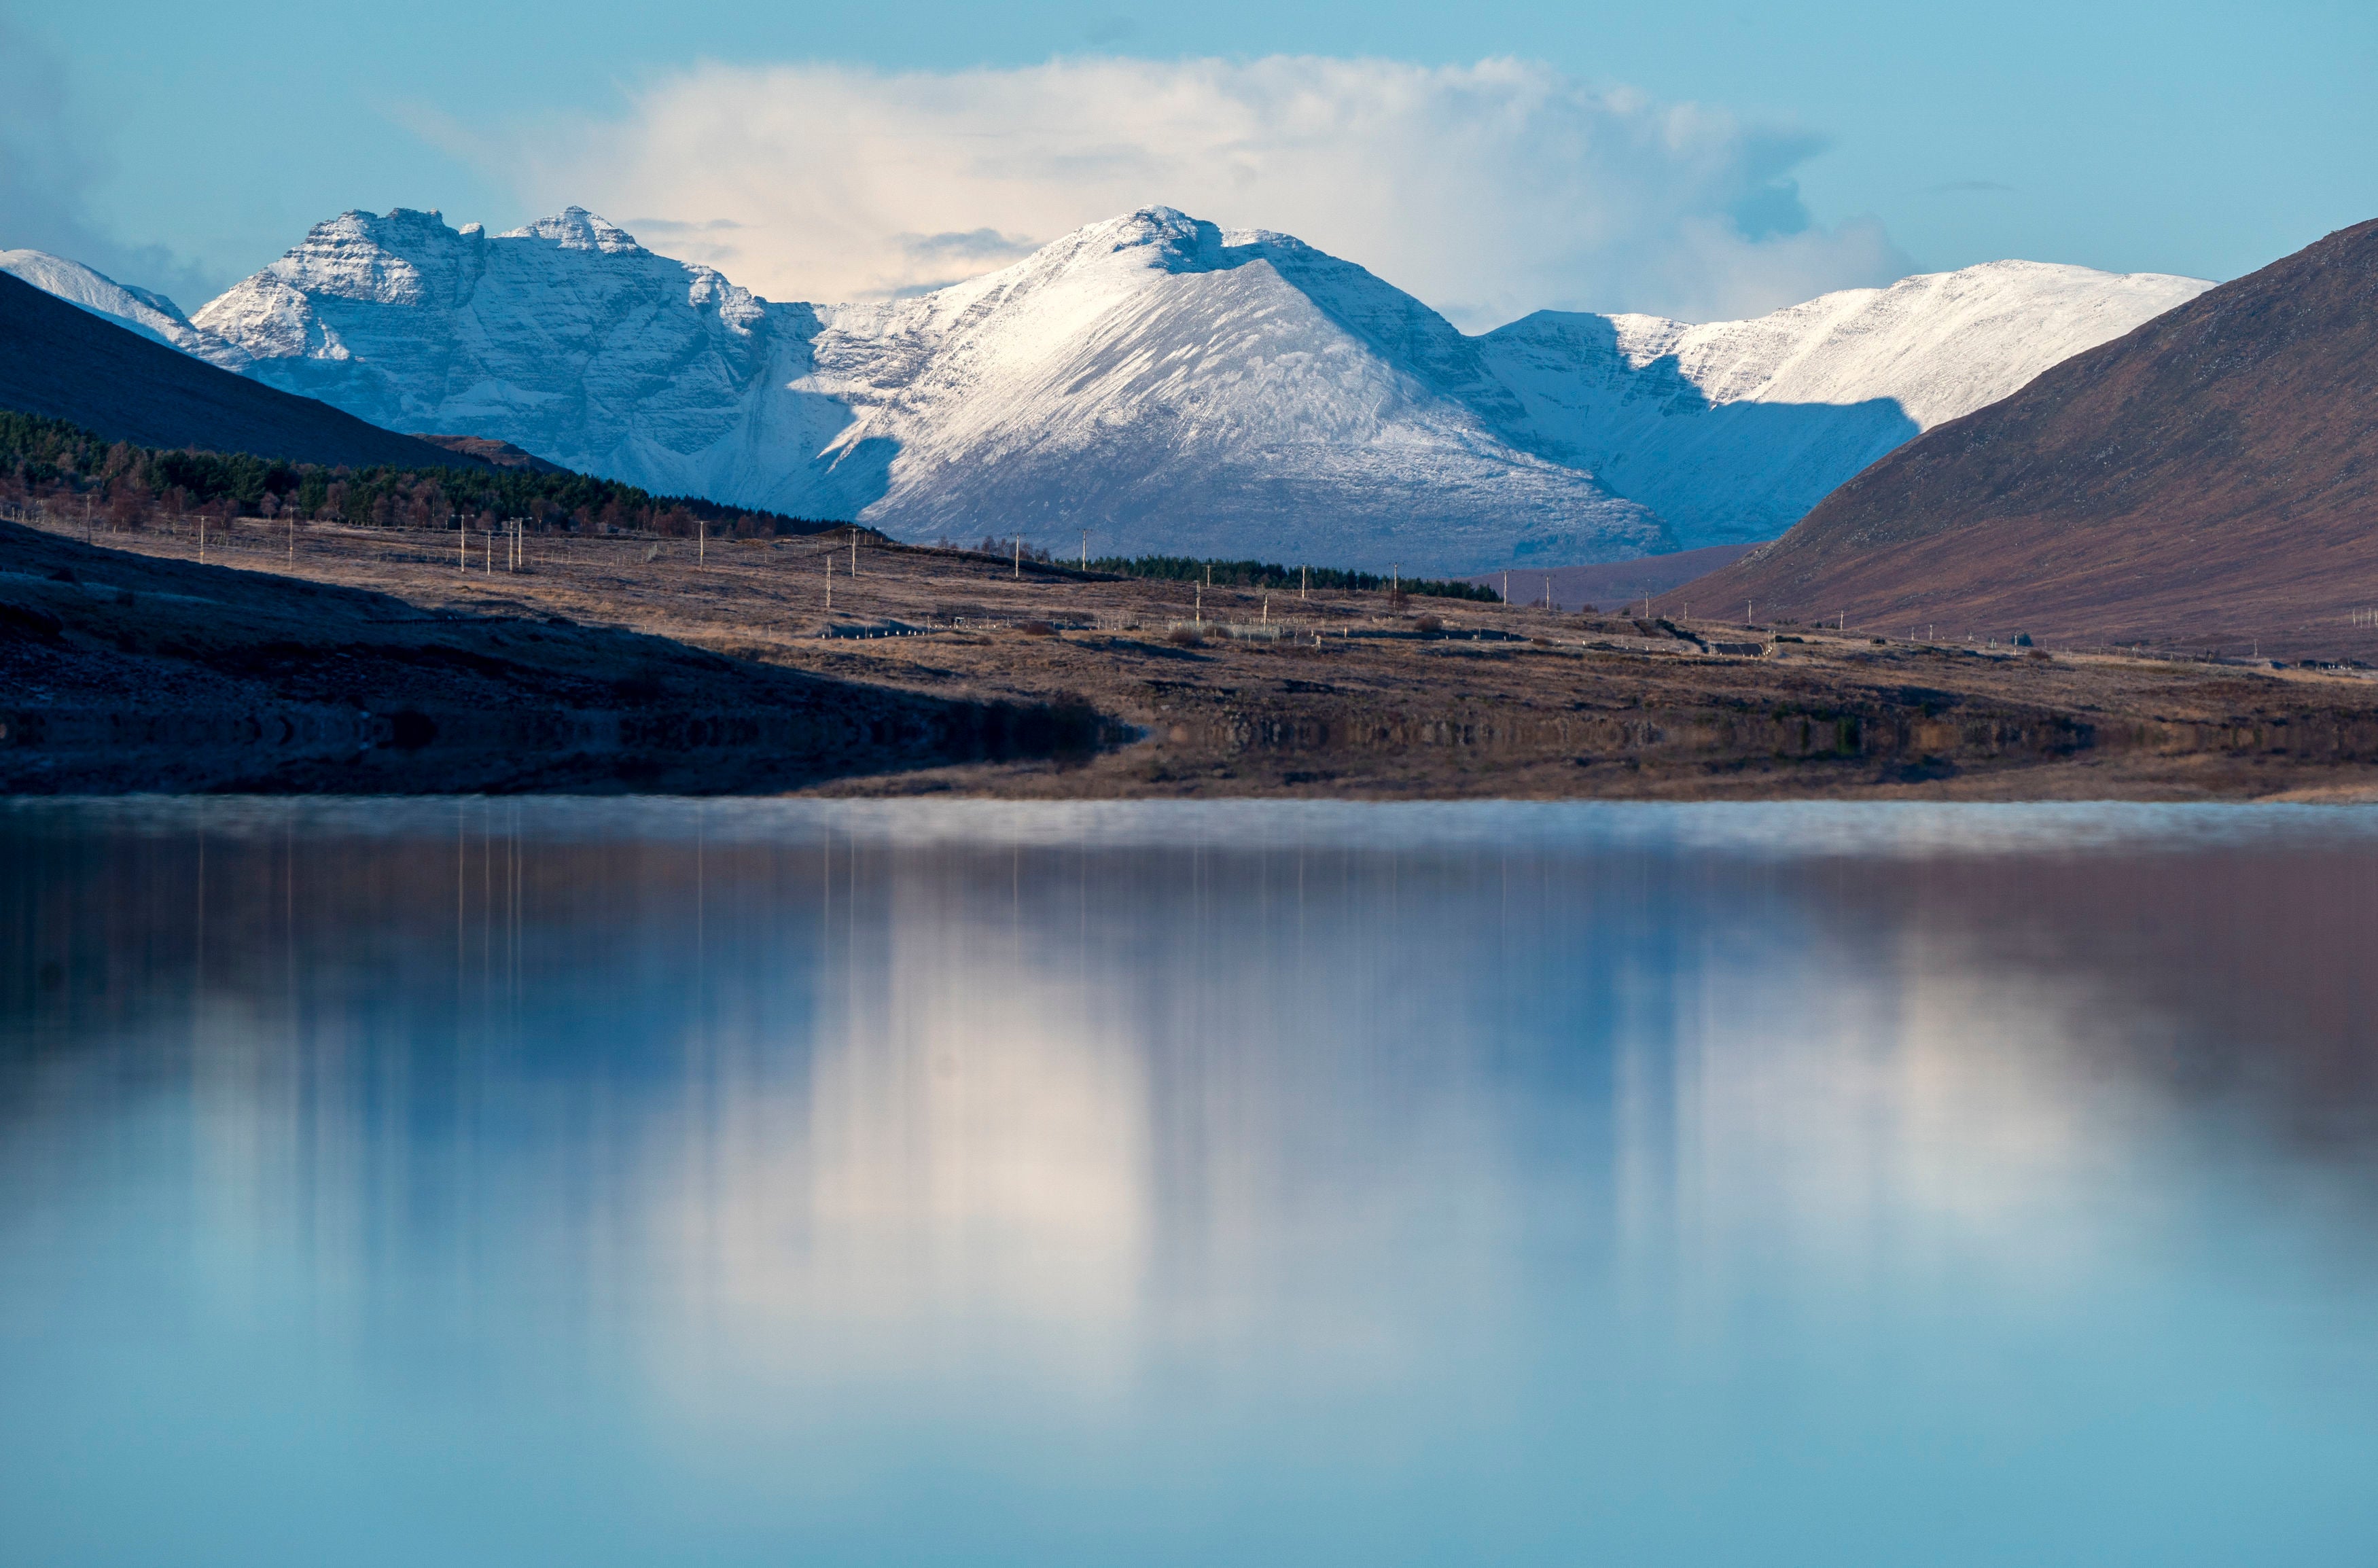 The snow-covered peak of Beinn Eighe and the mountains of Torridon reflected in Loch Glascarnoch near Ullapool, Wester Ross